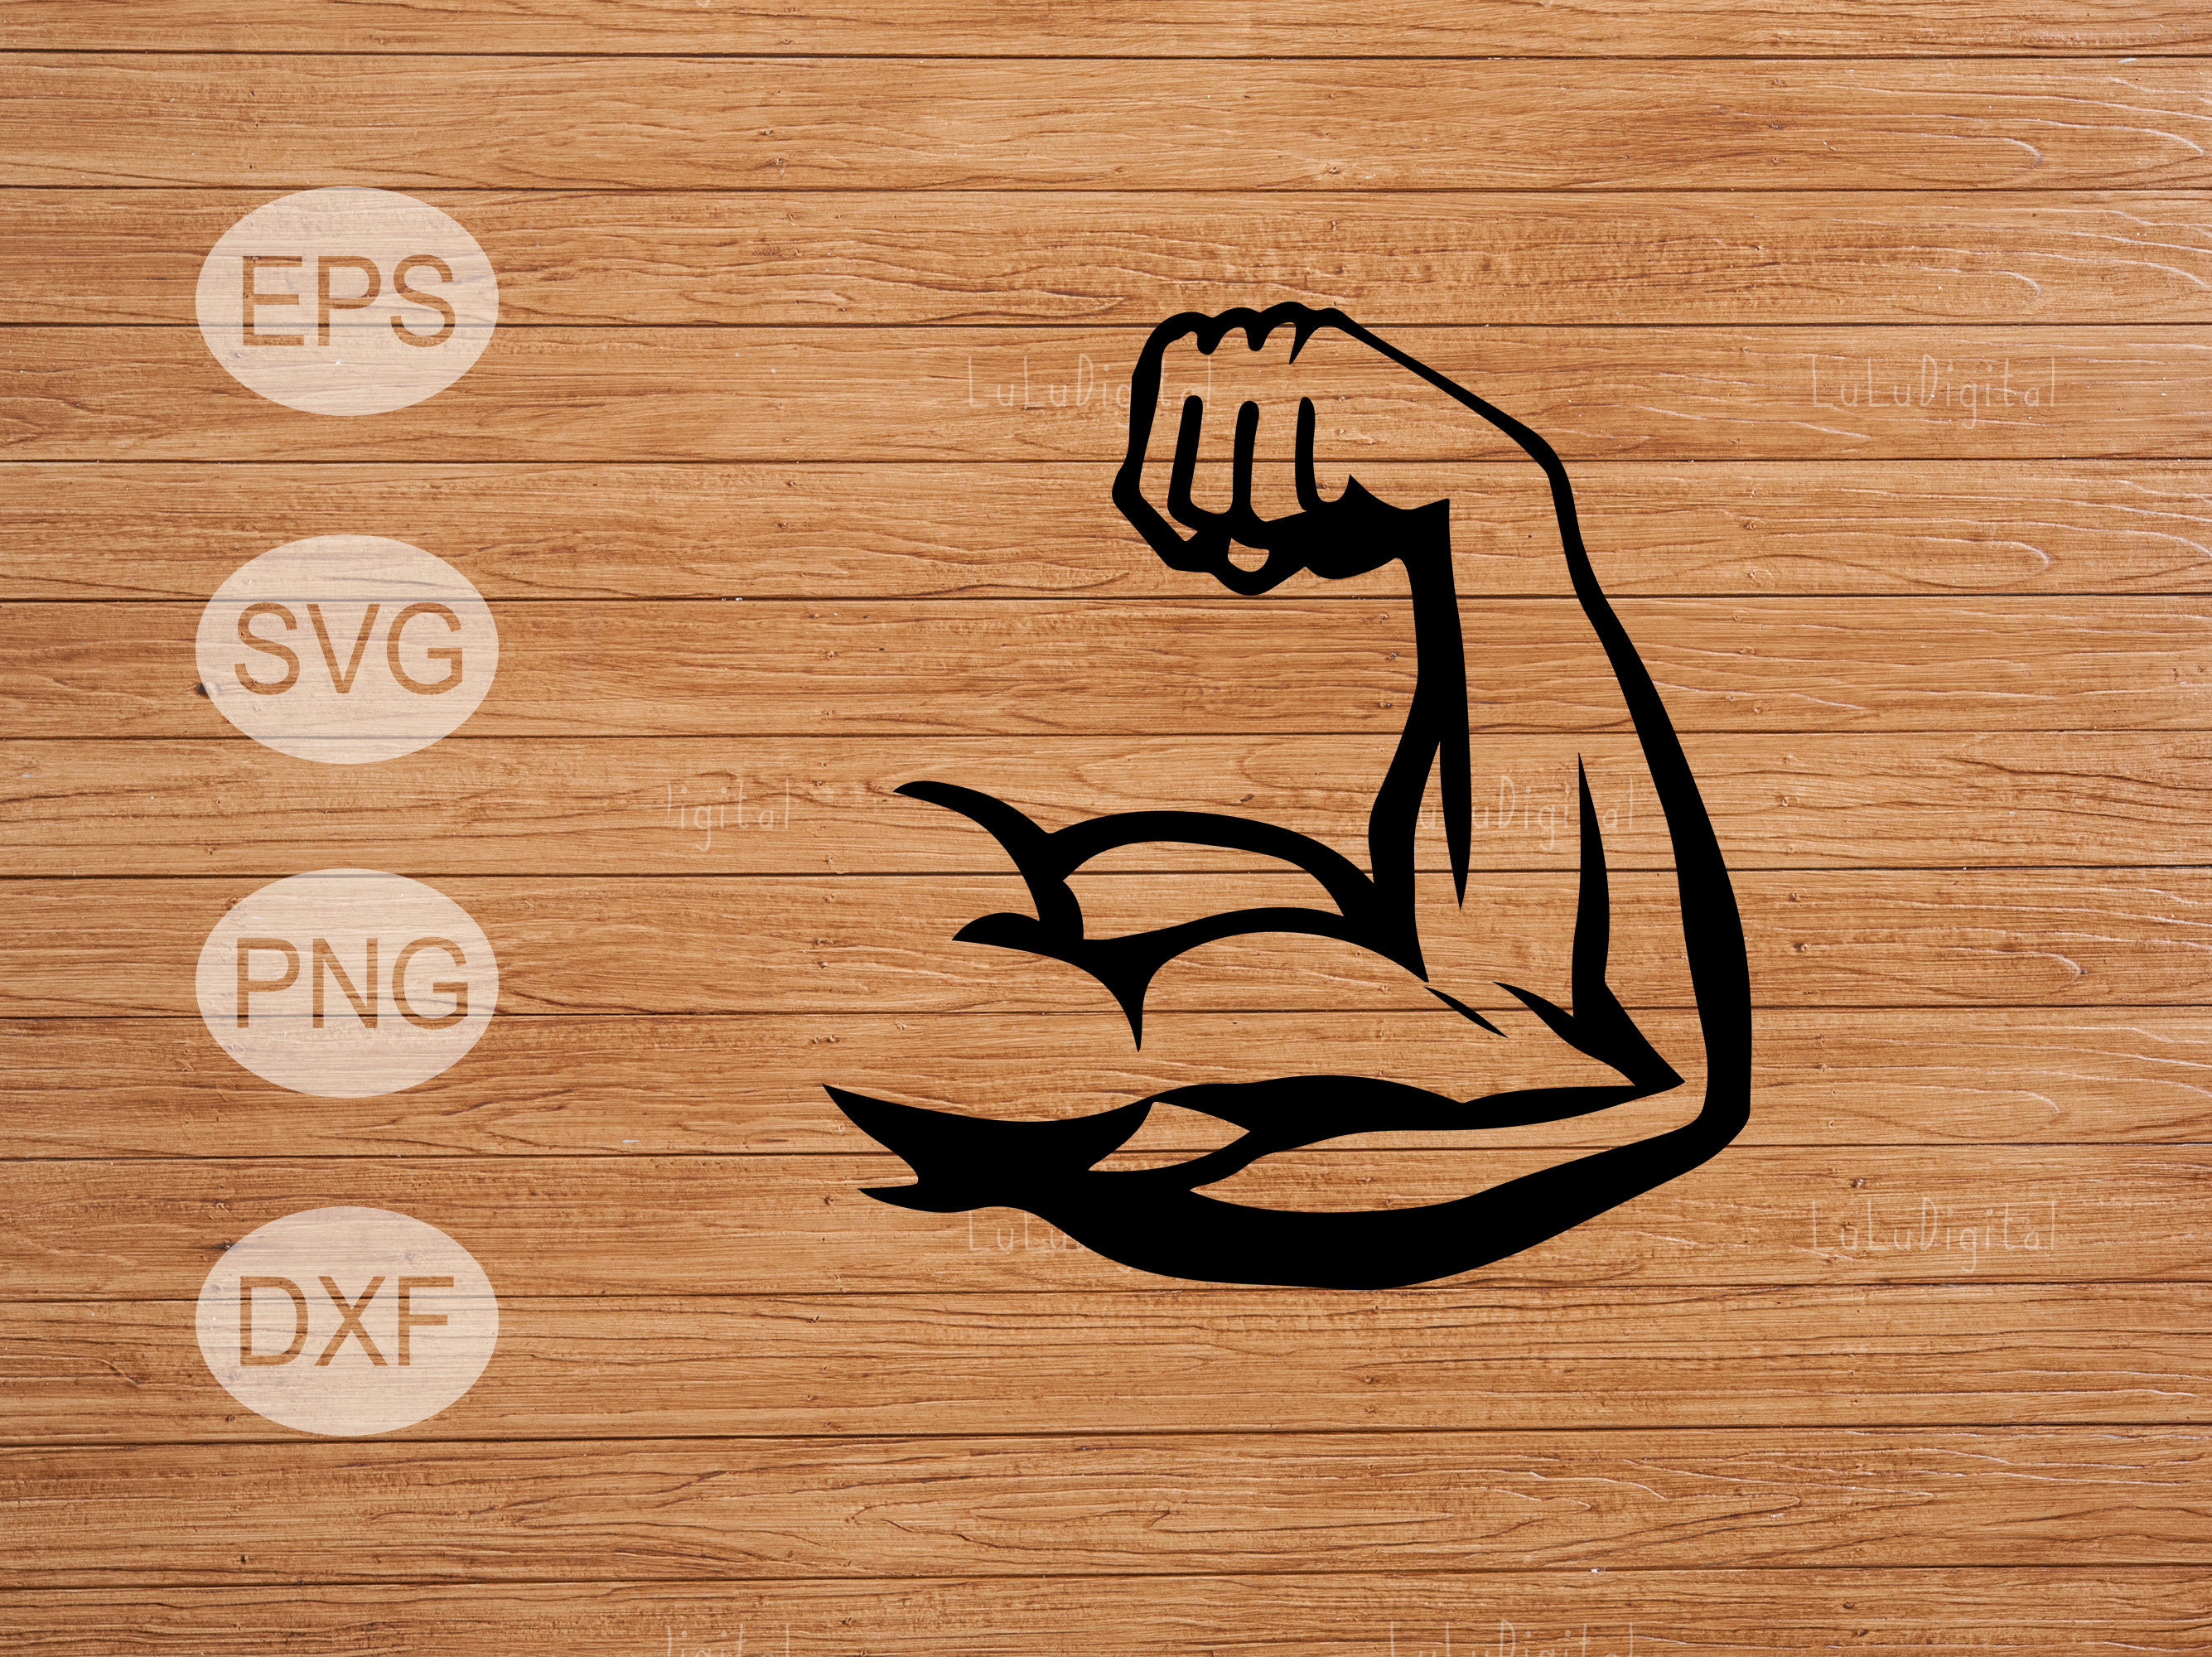 strong arm flex svg, eps, png, dxf, clipart for cricut and silhouette